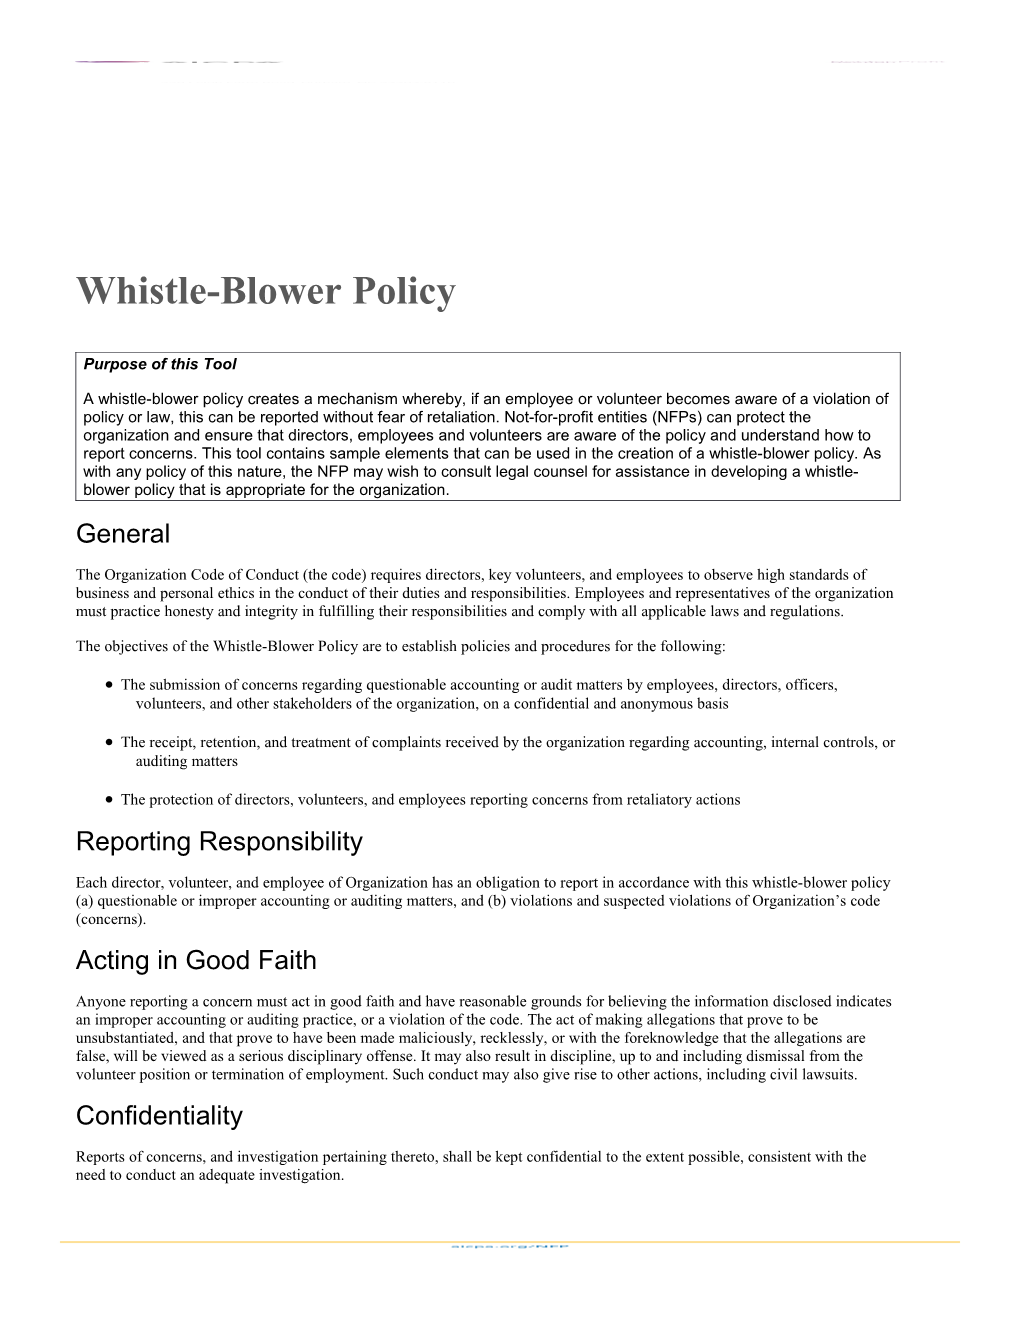 Not-For-Profit Whistle Blower Policy